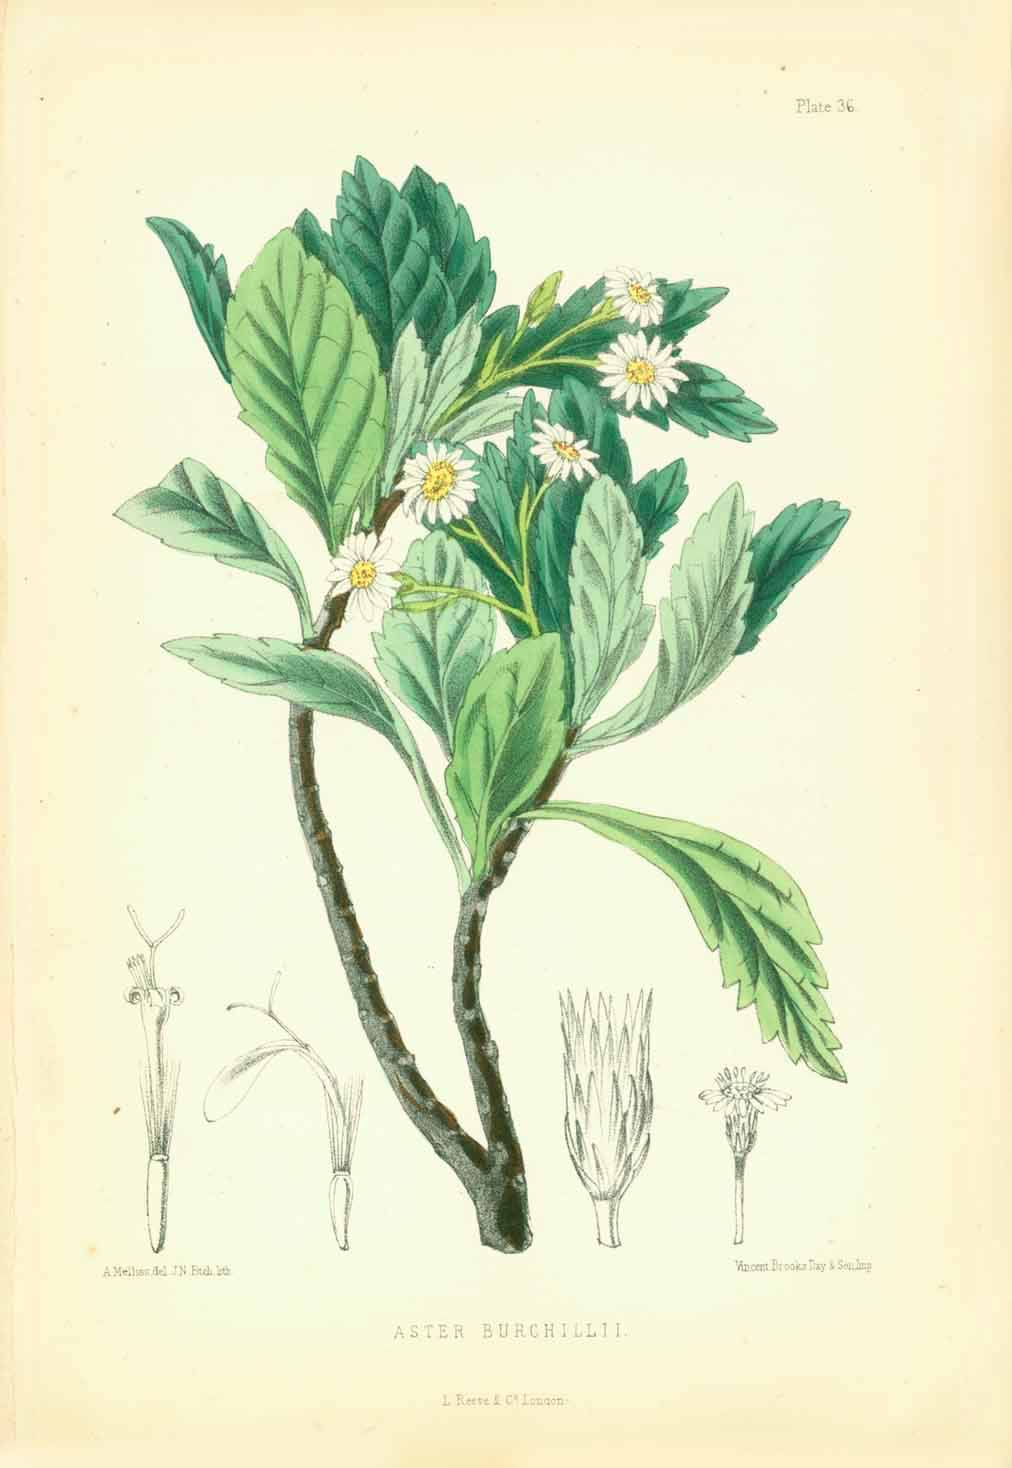 "Aster Burchillii"  Set of flowers indigenous to the Island of St. Helena in the South Atlantic.  All lithographs were printed in colour. Various artists.  Published in "St. Helena" by John Charles Melliss London, 1875  The prints are in good condition. Little traces of age and use remain unmentioned.